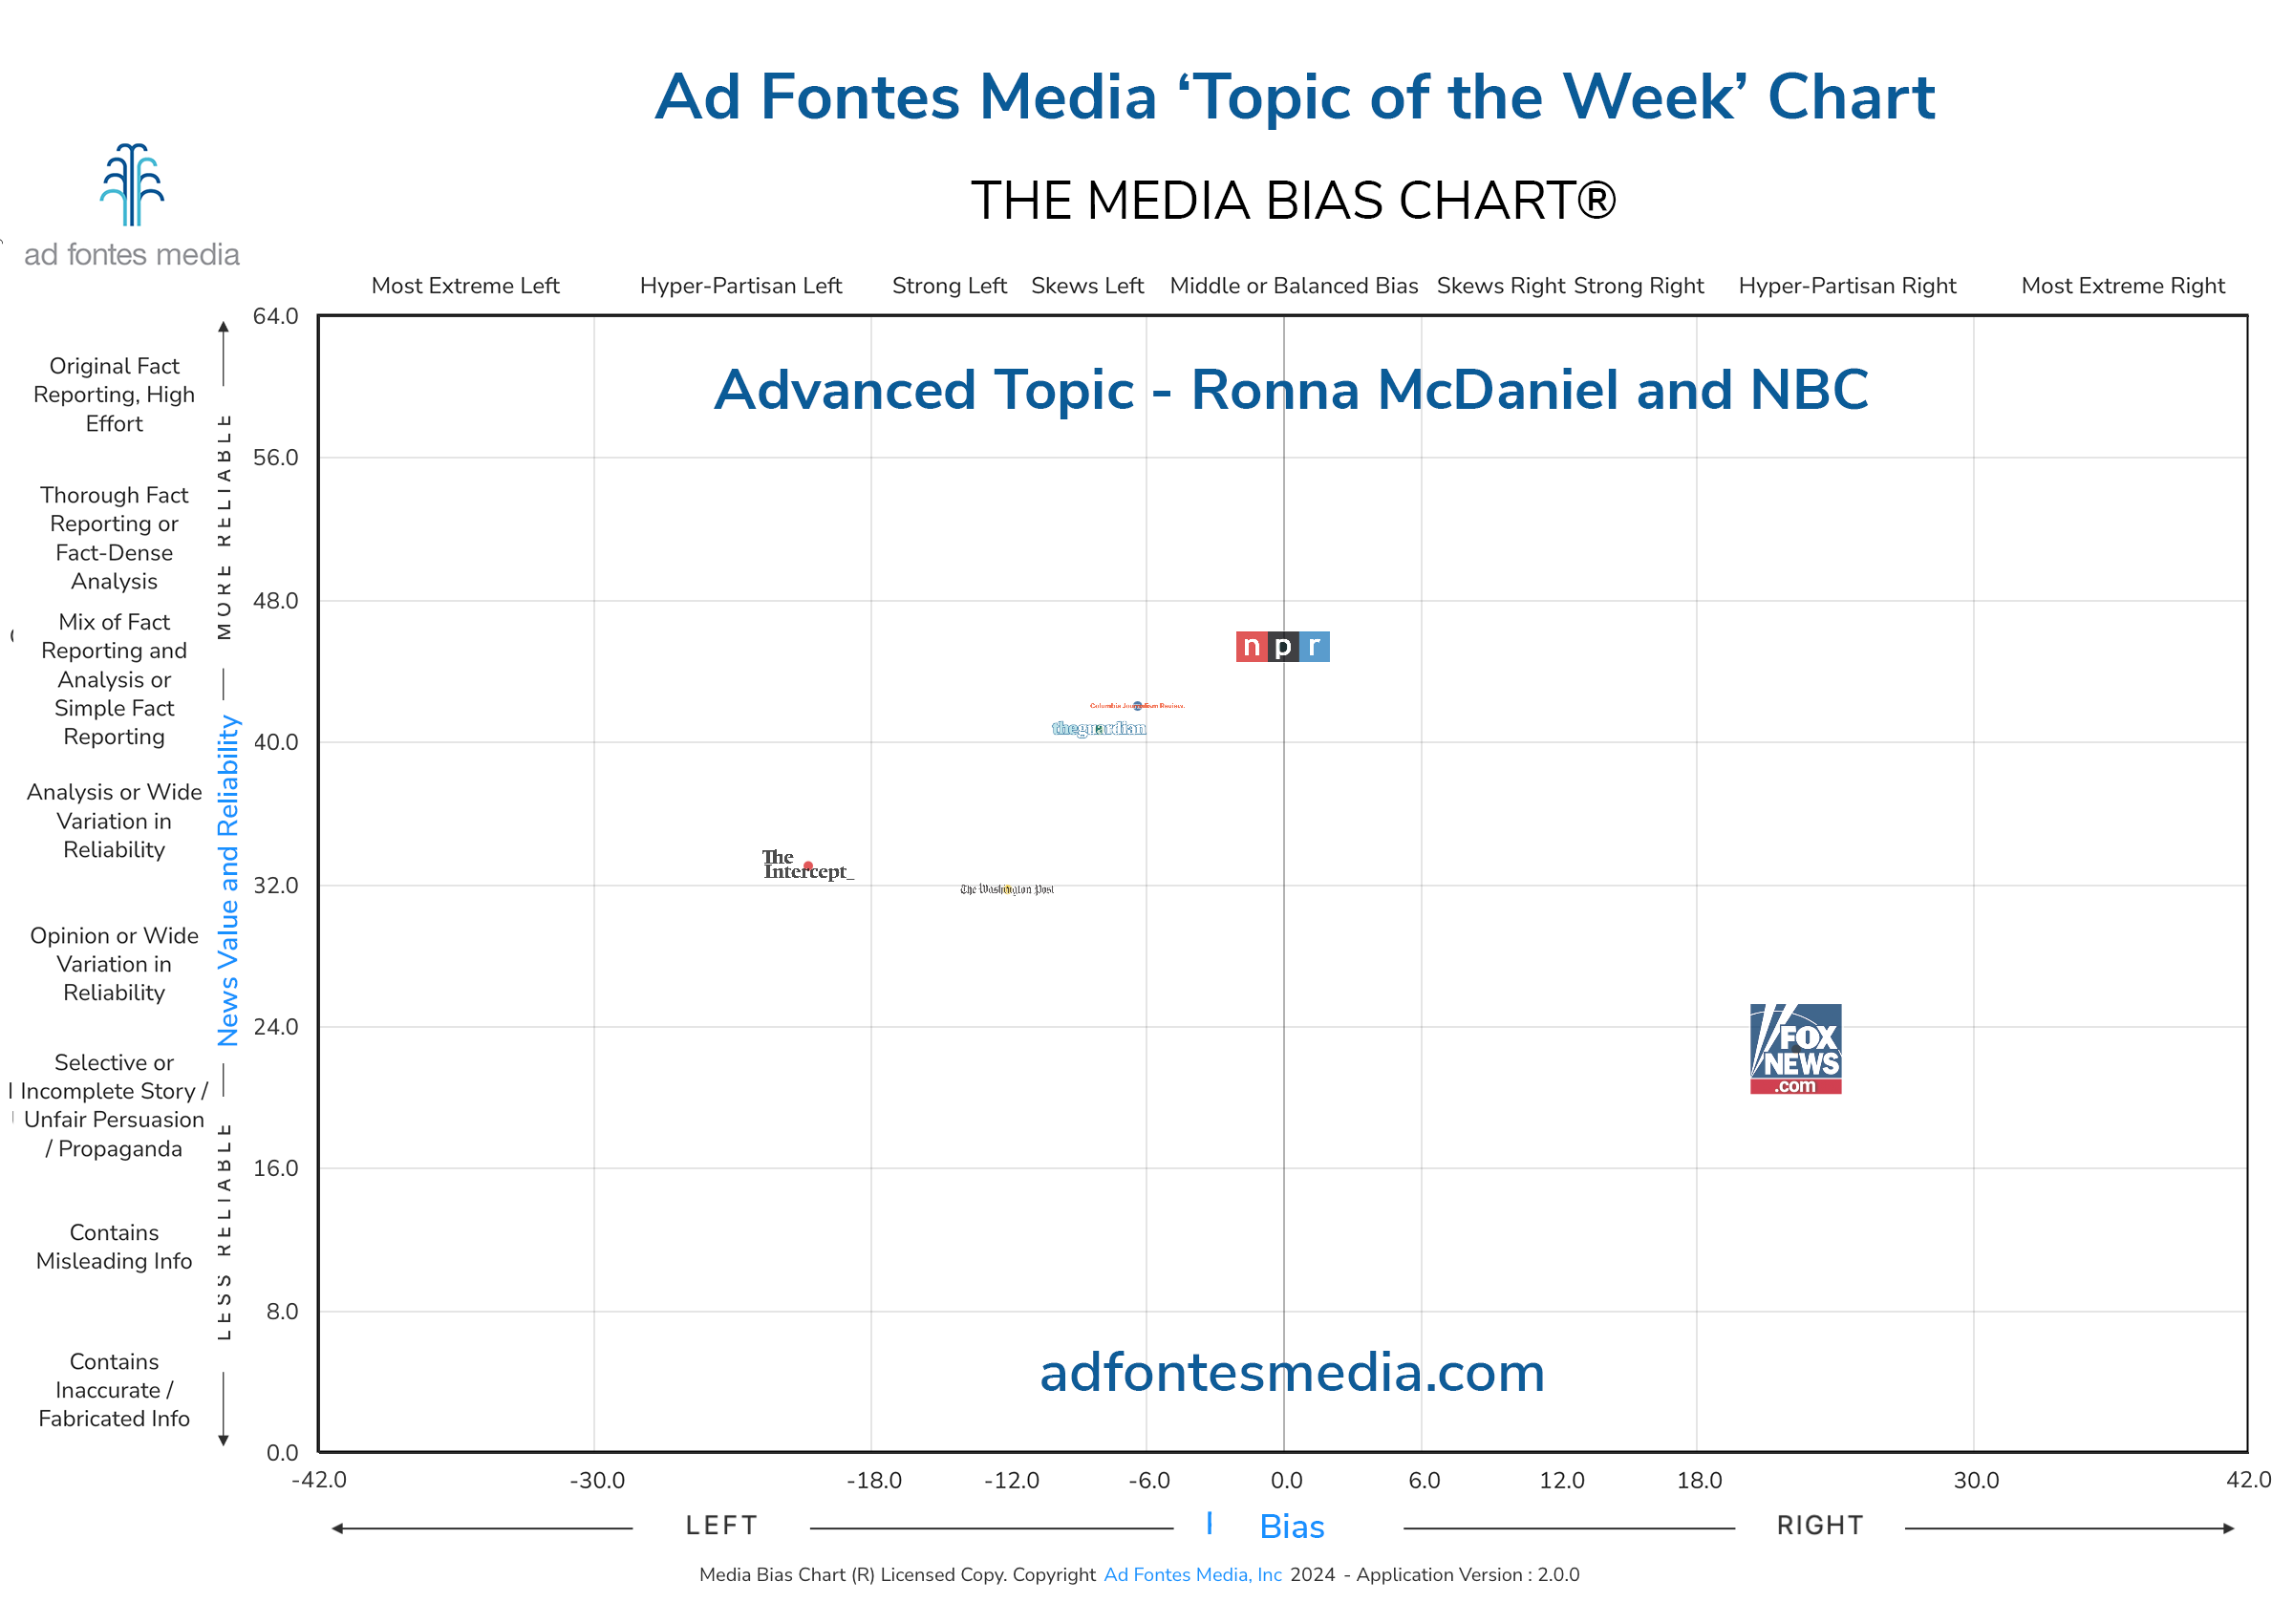 The Media Bias Chart takes a look at articles covering former RNC chair Ronna McDaniel’s hiring and firing as a political analyst at NBC